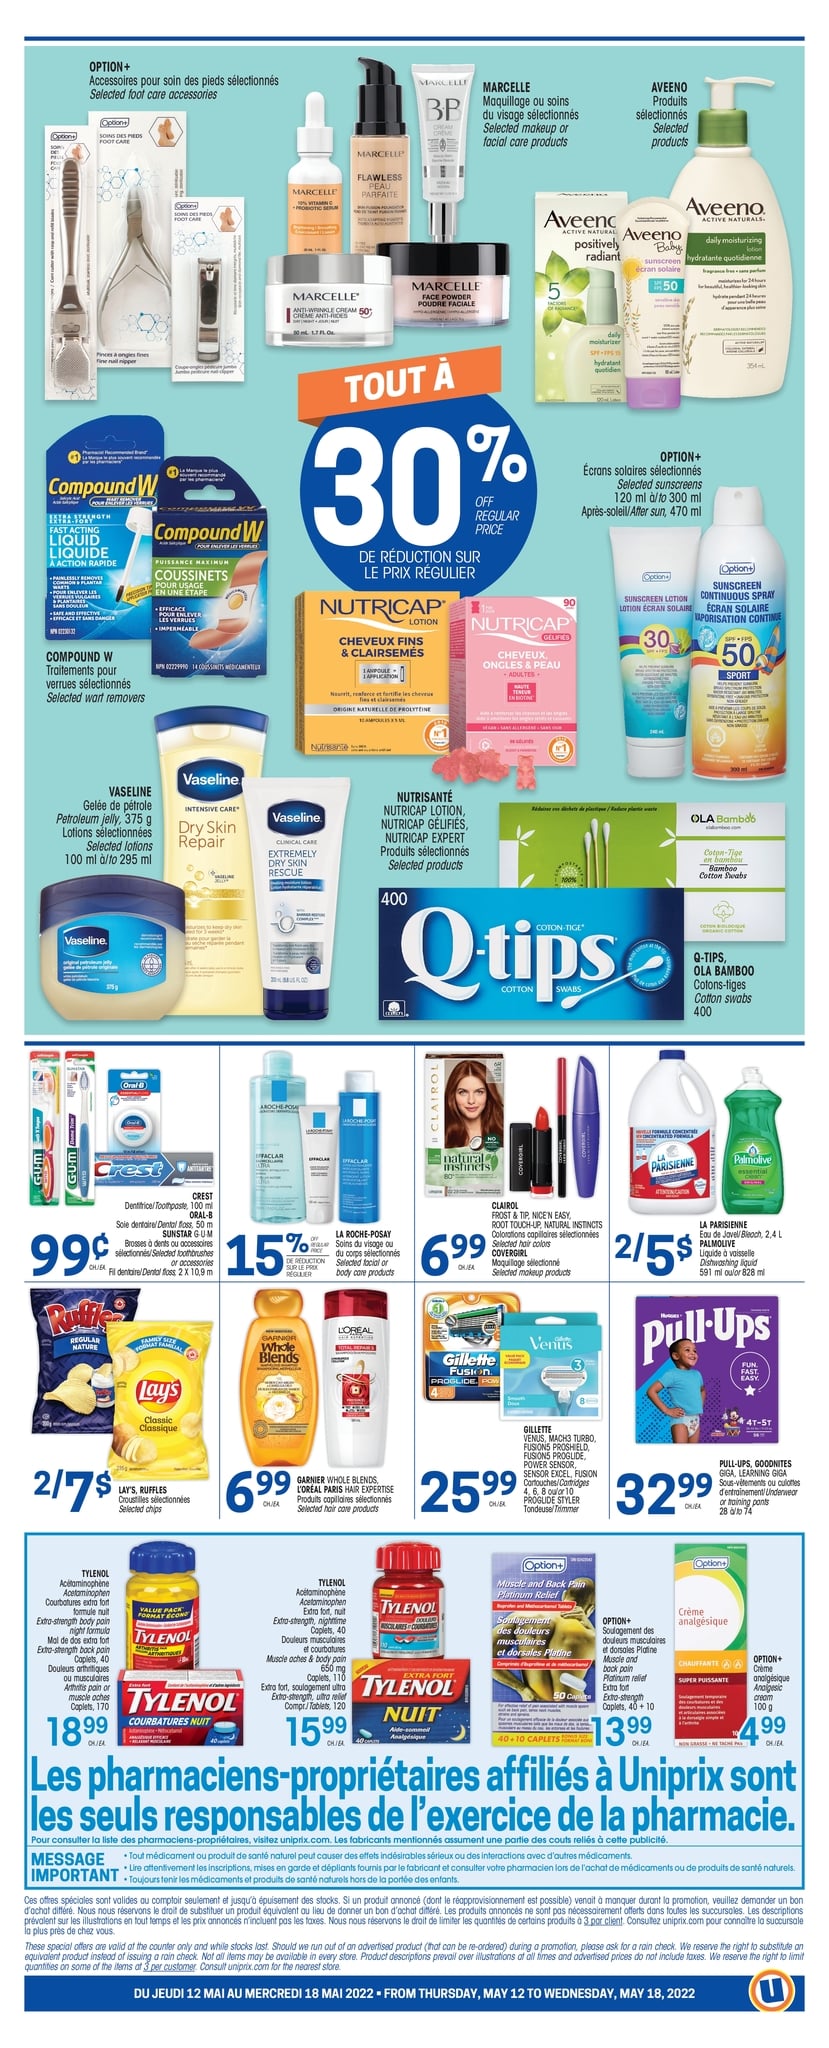 Uniprix - Weekly Flyer Specials - Page 6